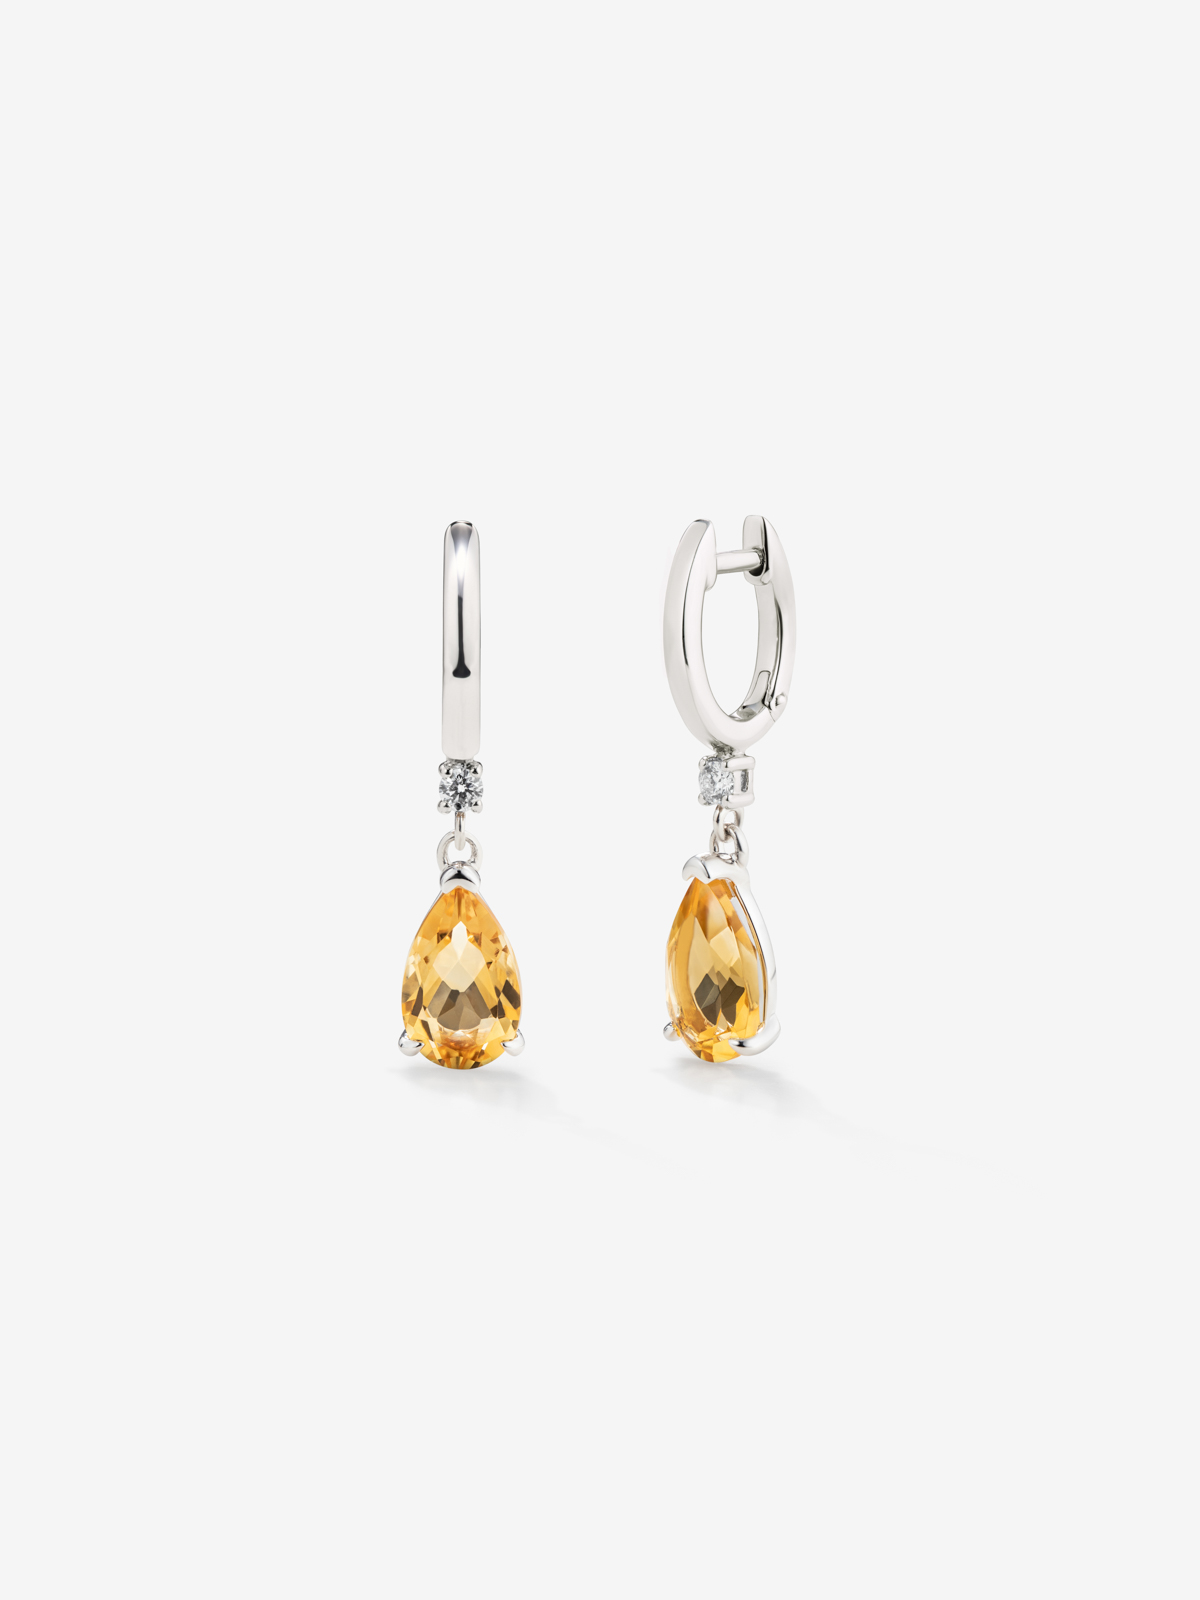 925 Silver hoop earrings with citrine and hanging diamond